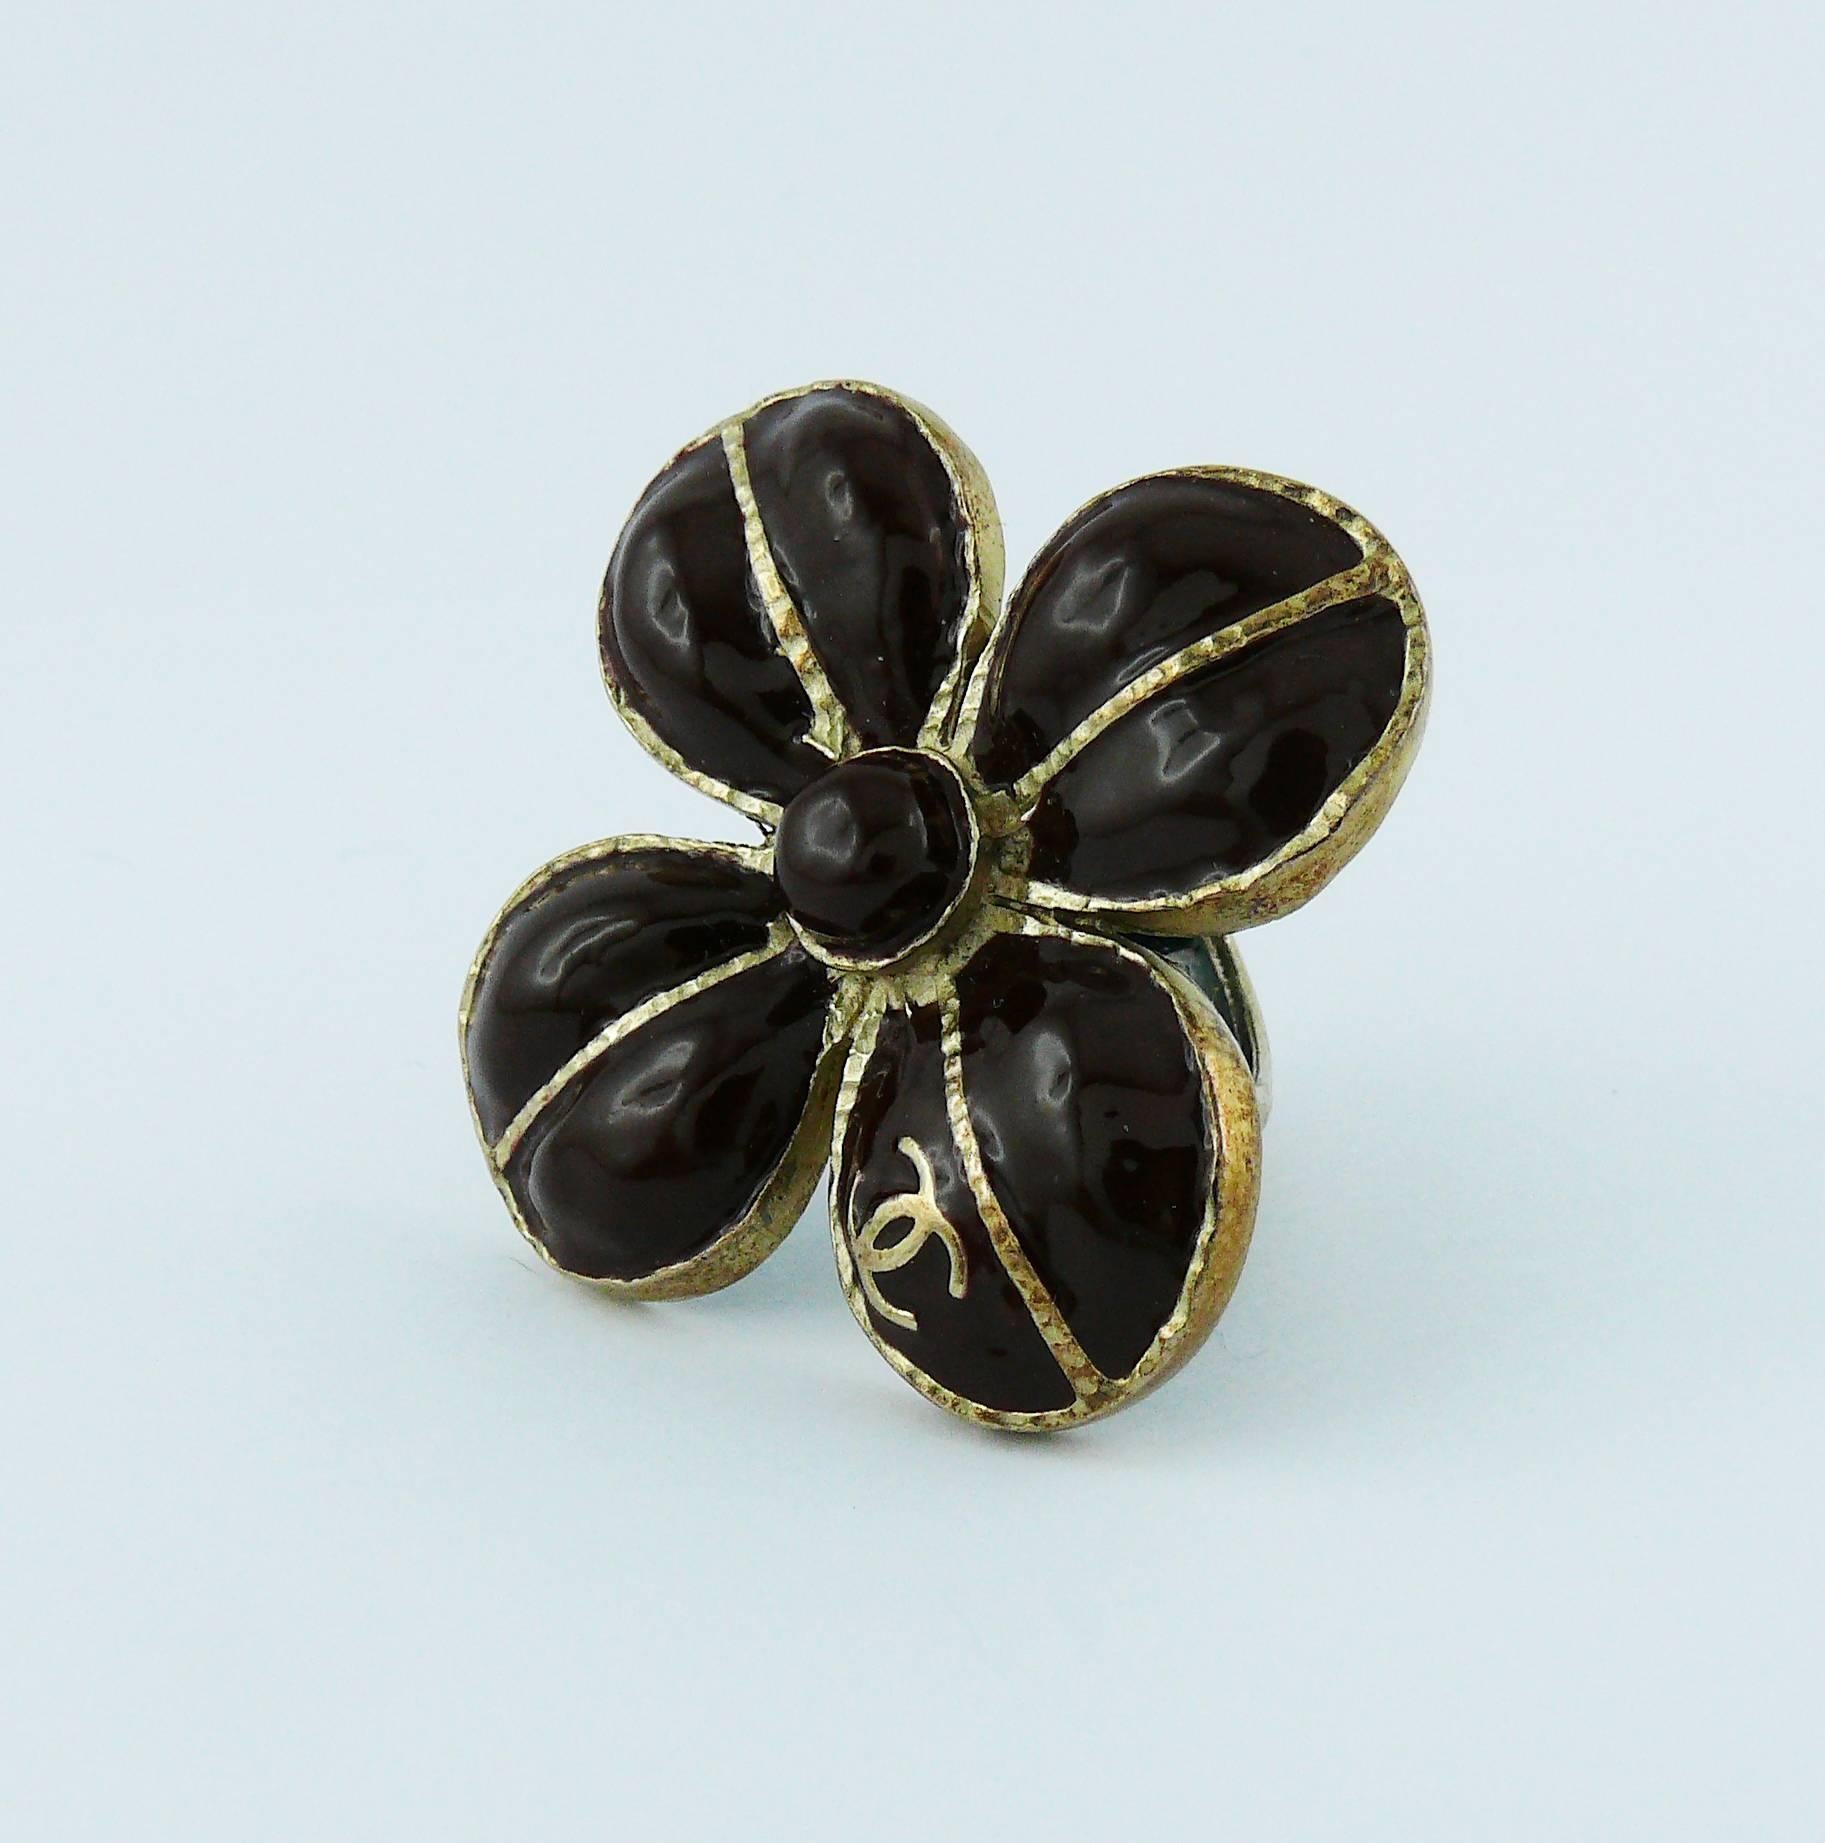 CHANEL clover ring featuring brown resin petals and CC logo.

Fall/Winter 2007 Collection.

Marked CHANEL 07 A Made in France.

Indicative measurements : inner circumference approx. 5.34 cm (2.10 inches) / flower approx. 4 cm x 4 cm (1.57 inches x